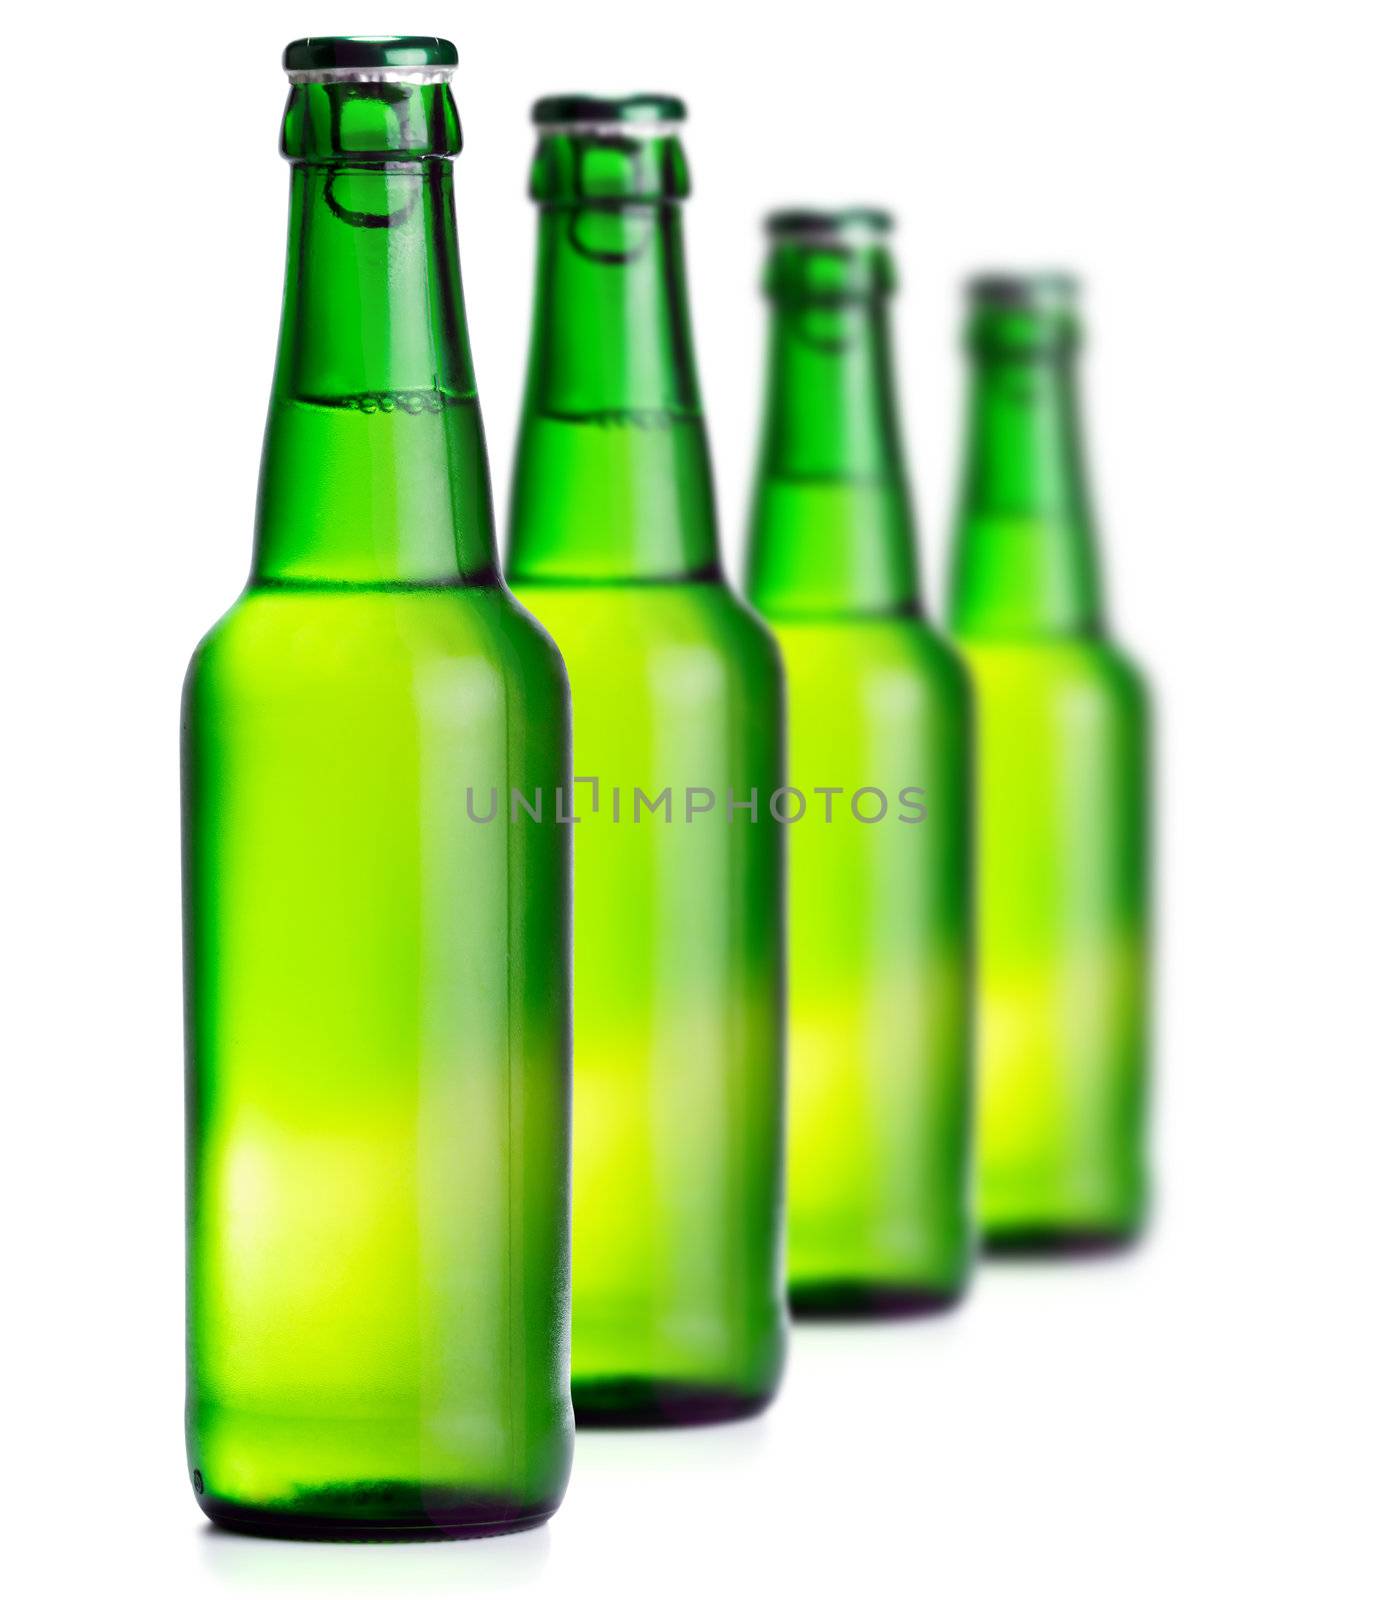 Beer bottle isolated on white